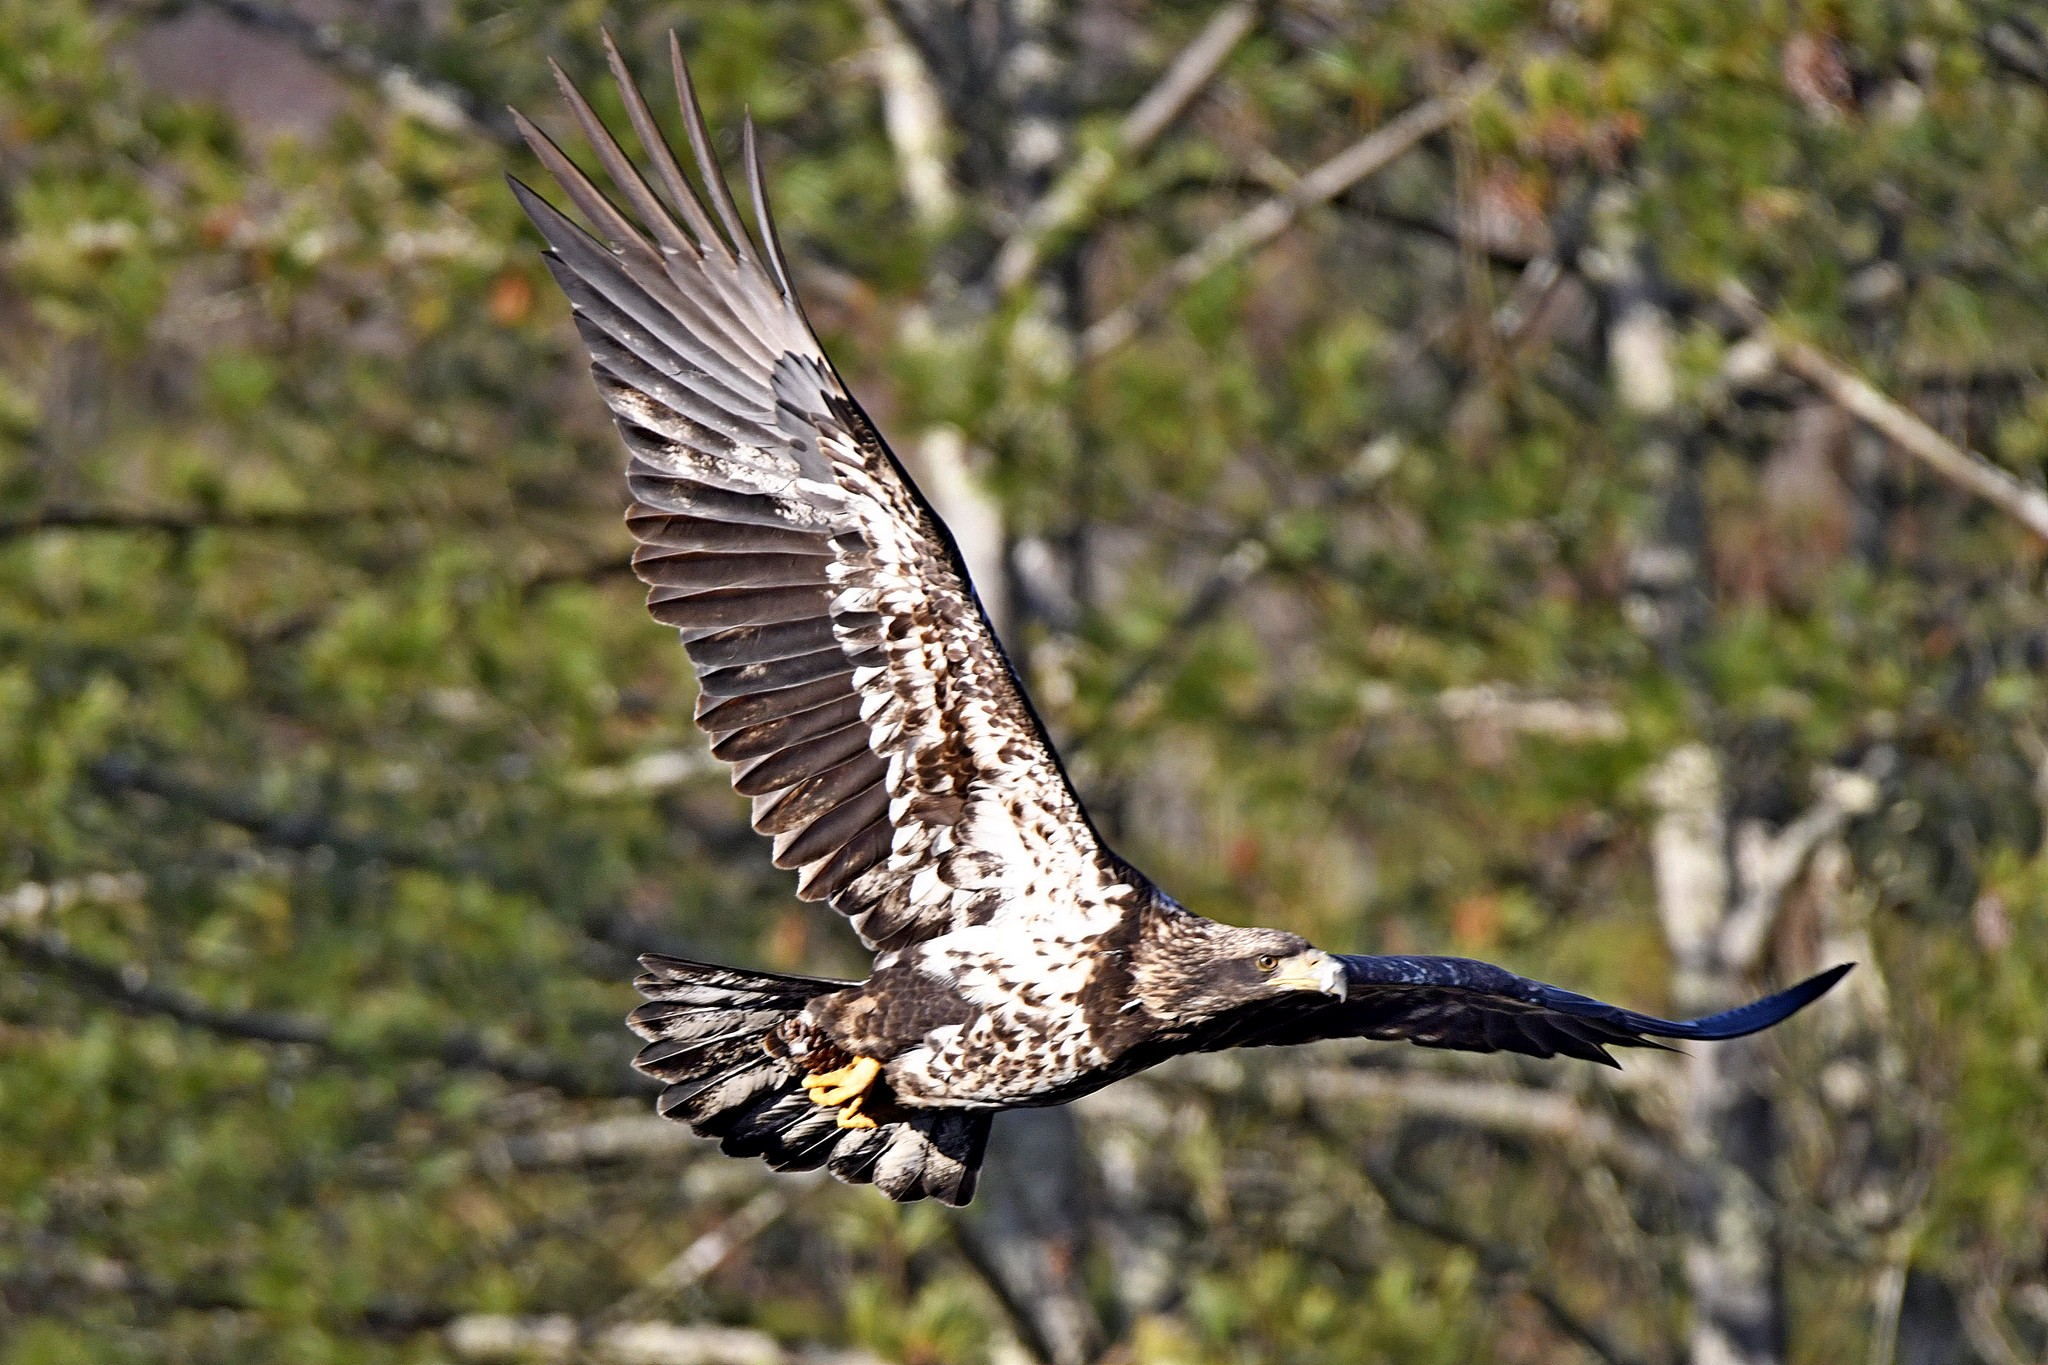 Eagle_9373 - Juvenile Bald Eagle in Flight On Mongaup River, NY by Buckmaster